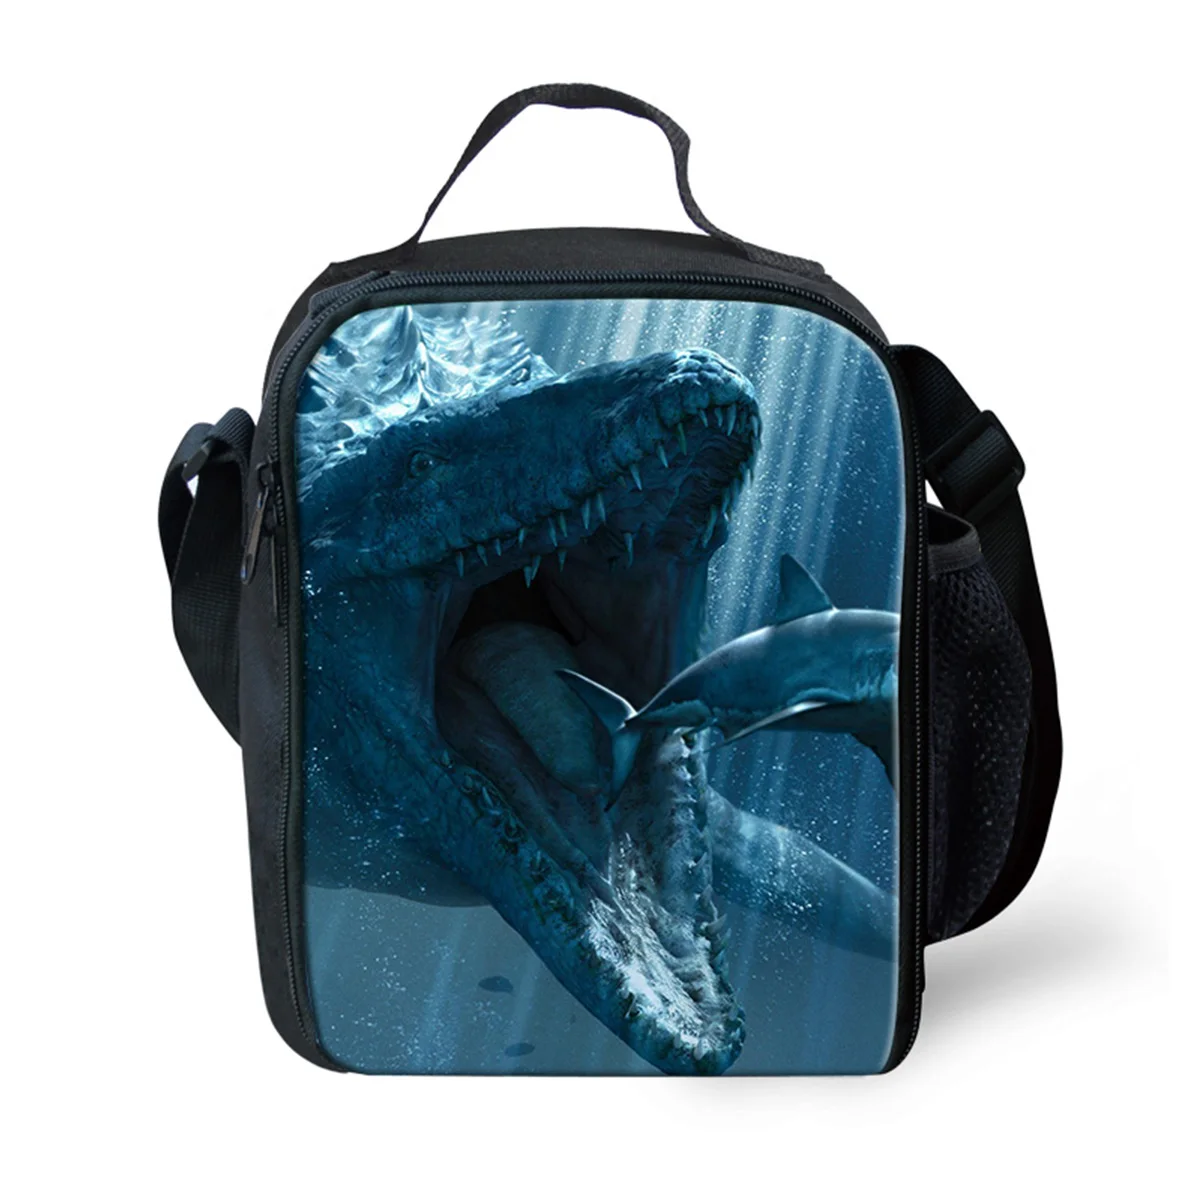 Advocator Underwater Animals Lunch Bags for Kids Accessories Children Picnic Thermal Bag Customized Loncheras Free Shipping